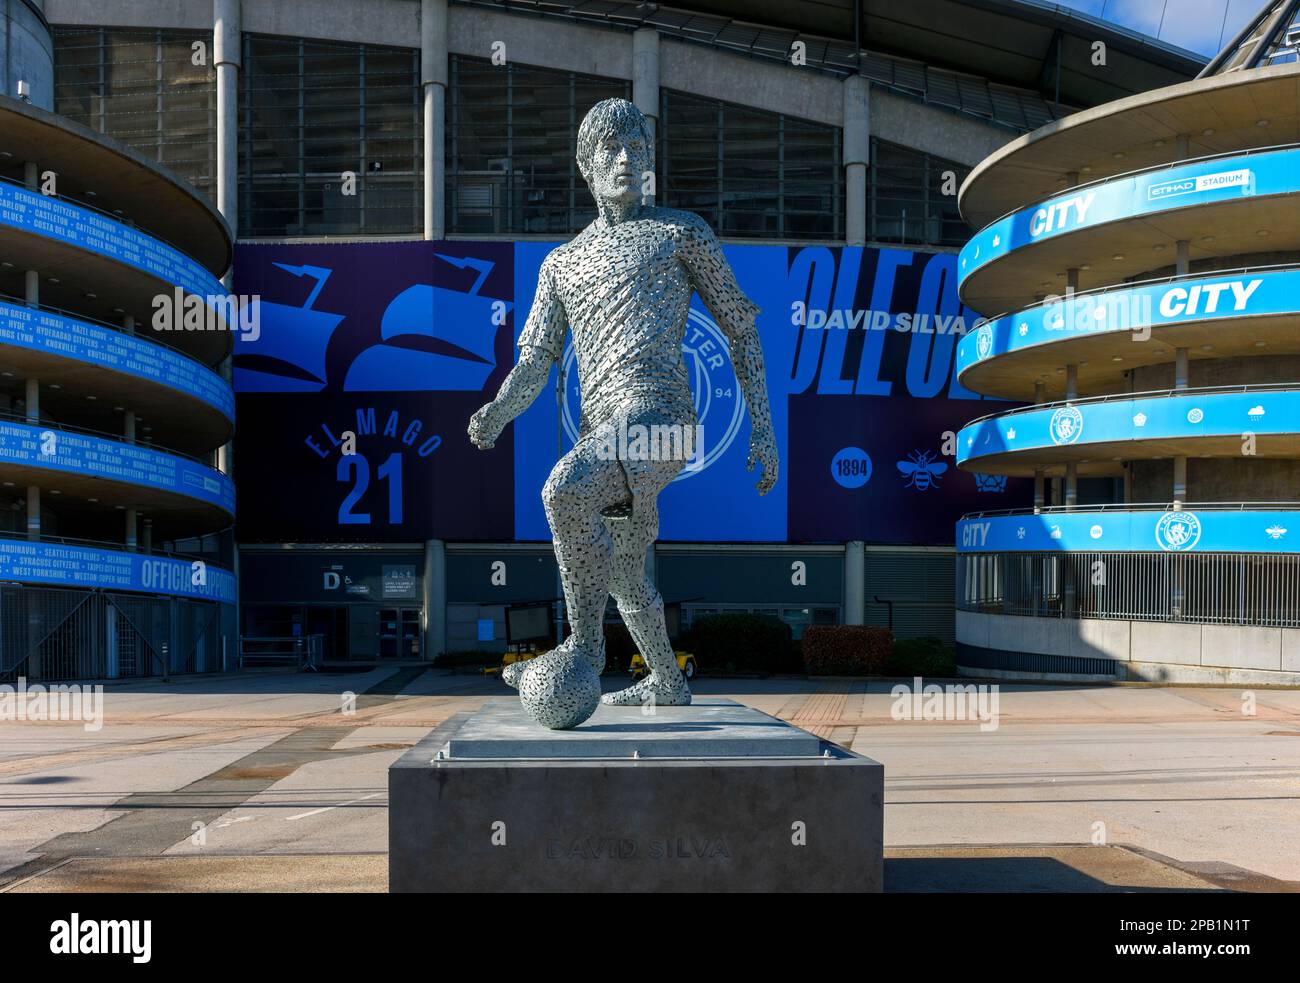 Statue of David Silva, by the sculptor Andy Scott, at the Etihad Stadium, Manchester, England, UK Stock Photo